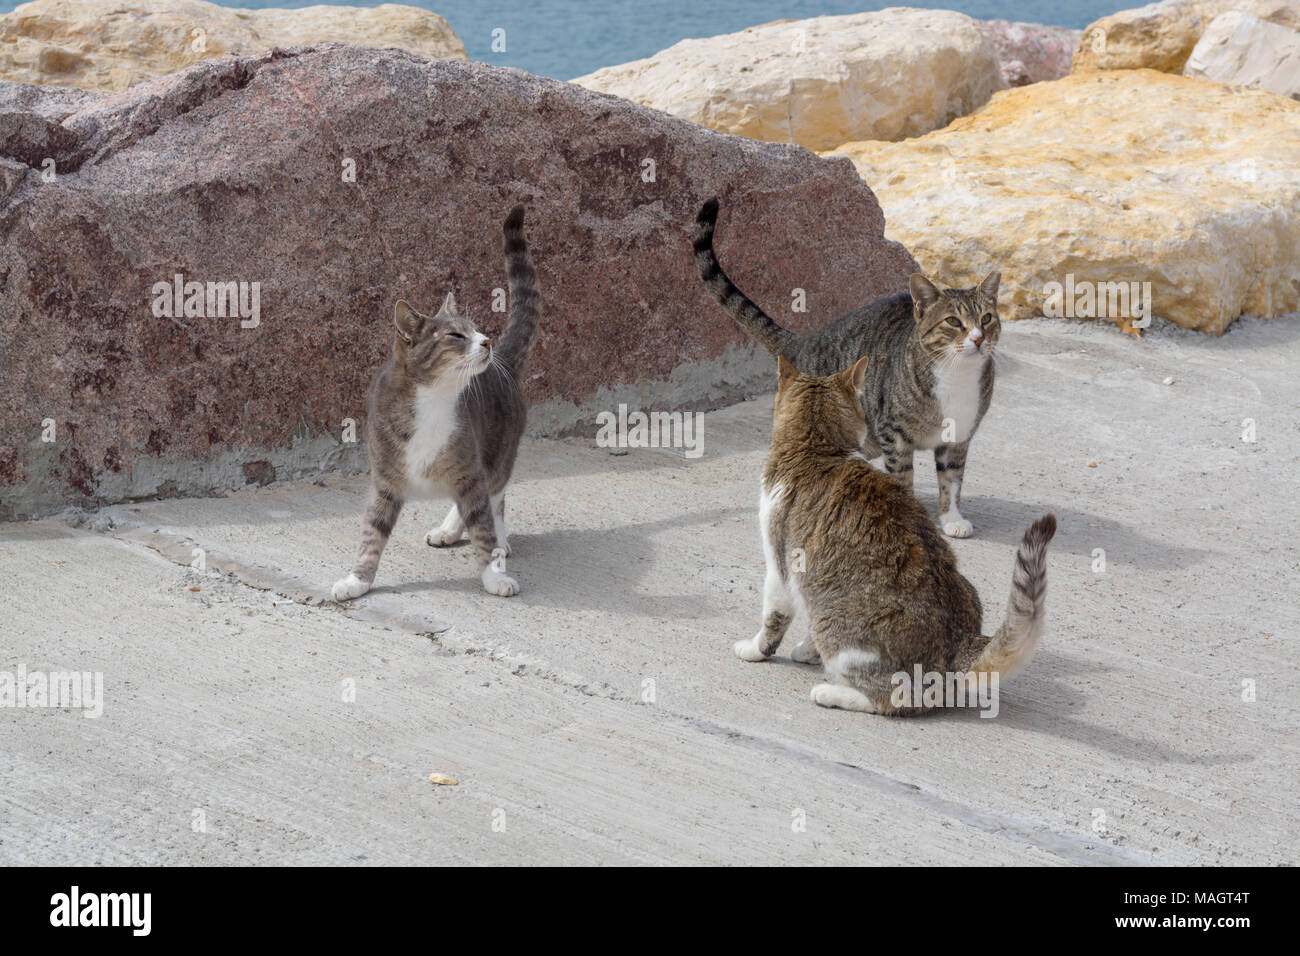 Cats of Eilat, Israel. Many cats leave on streets and beaches of Eilat, they protect the city from rats and snakes Stock Photo